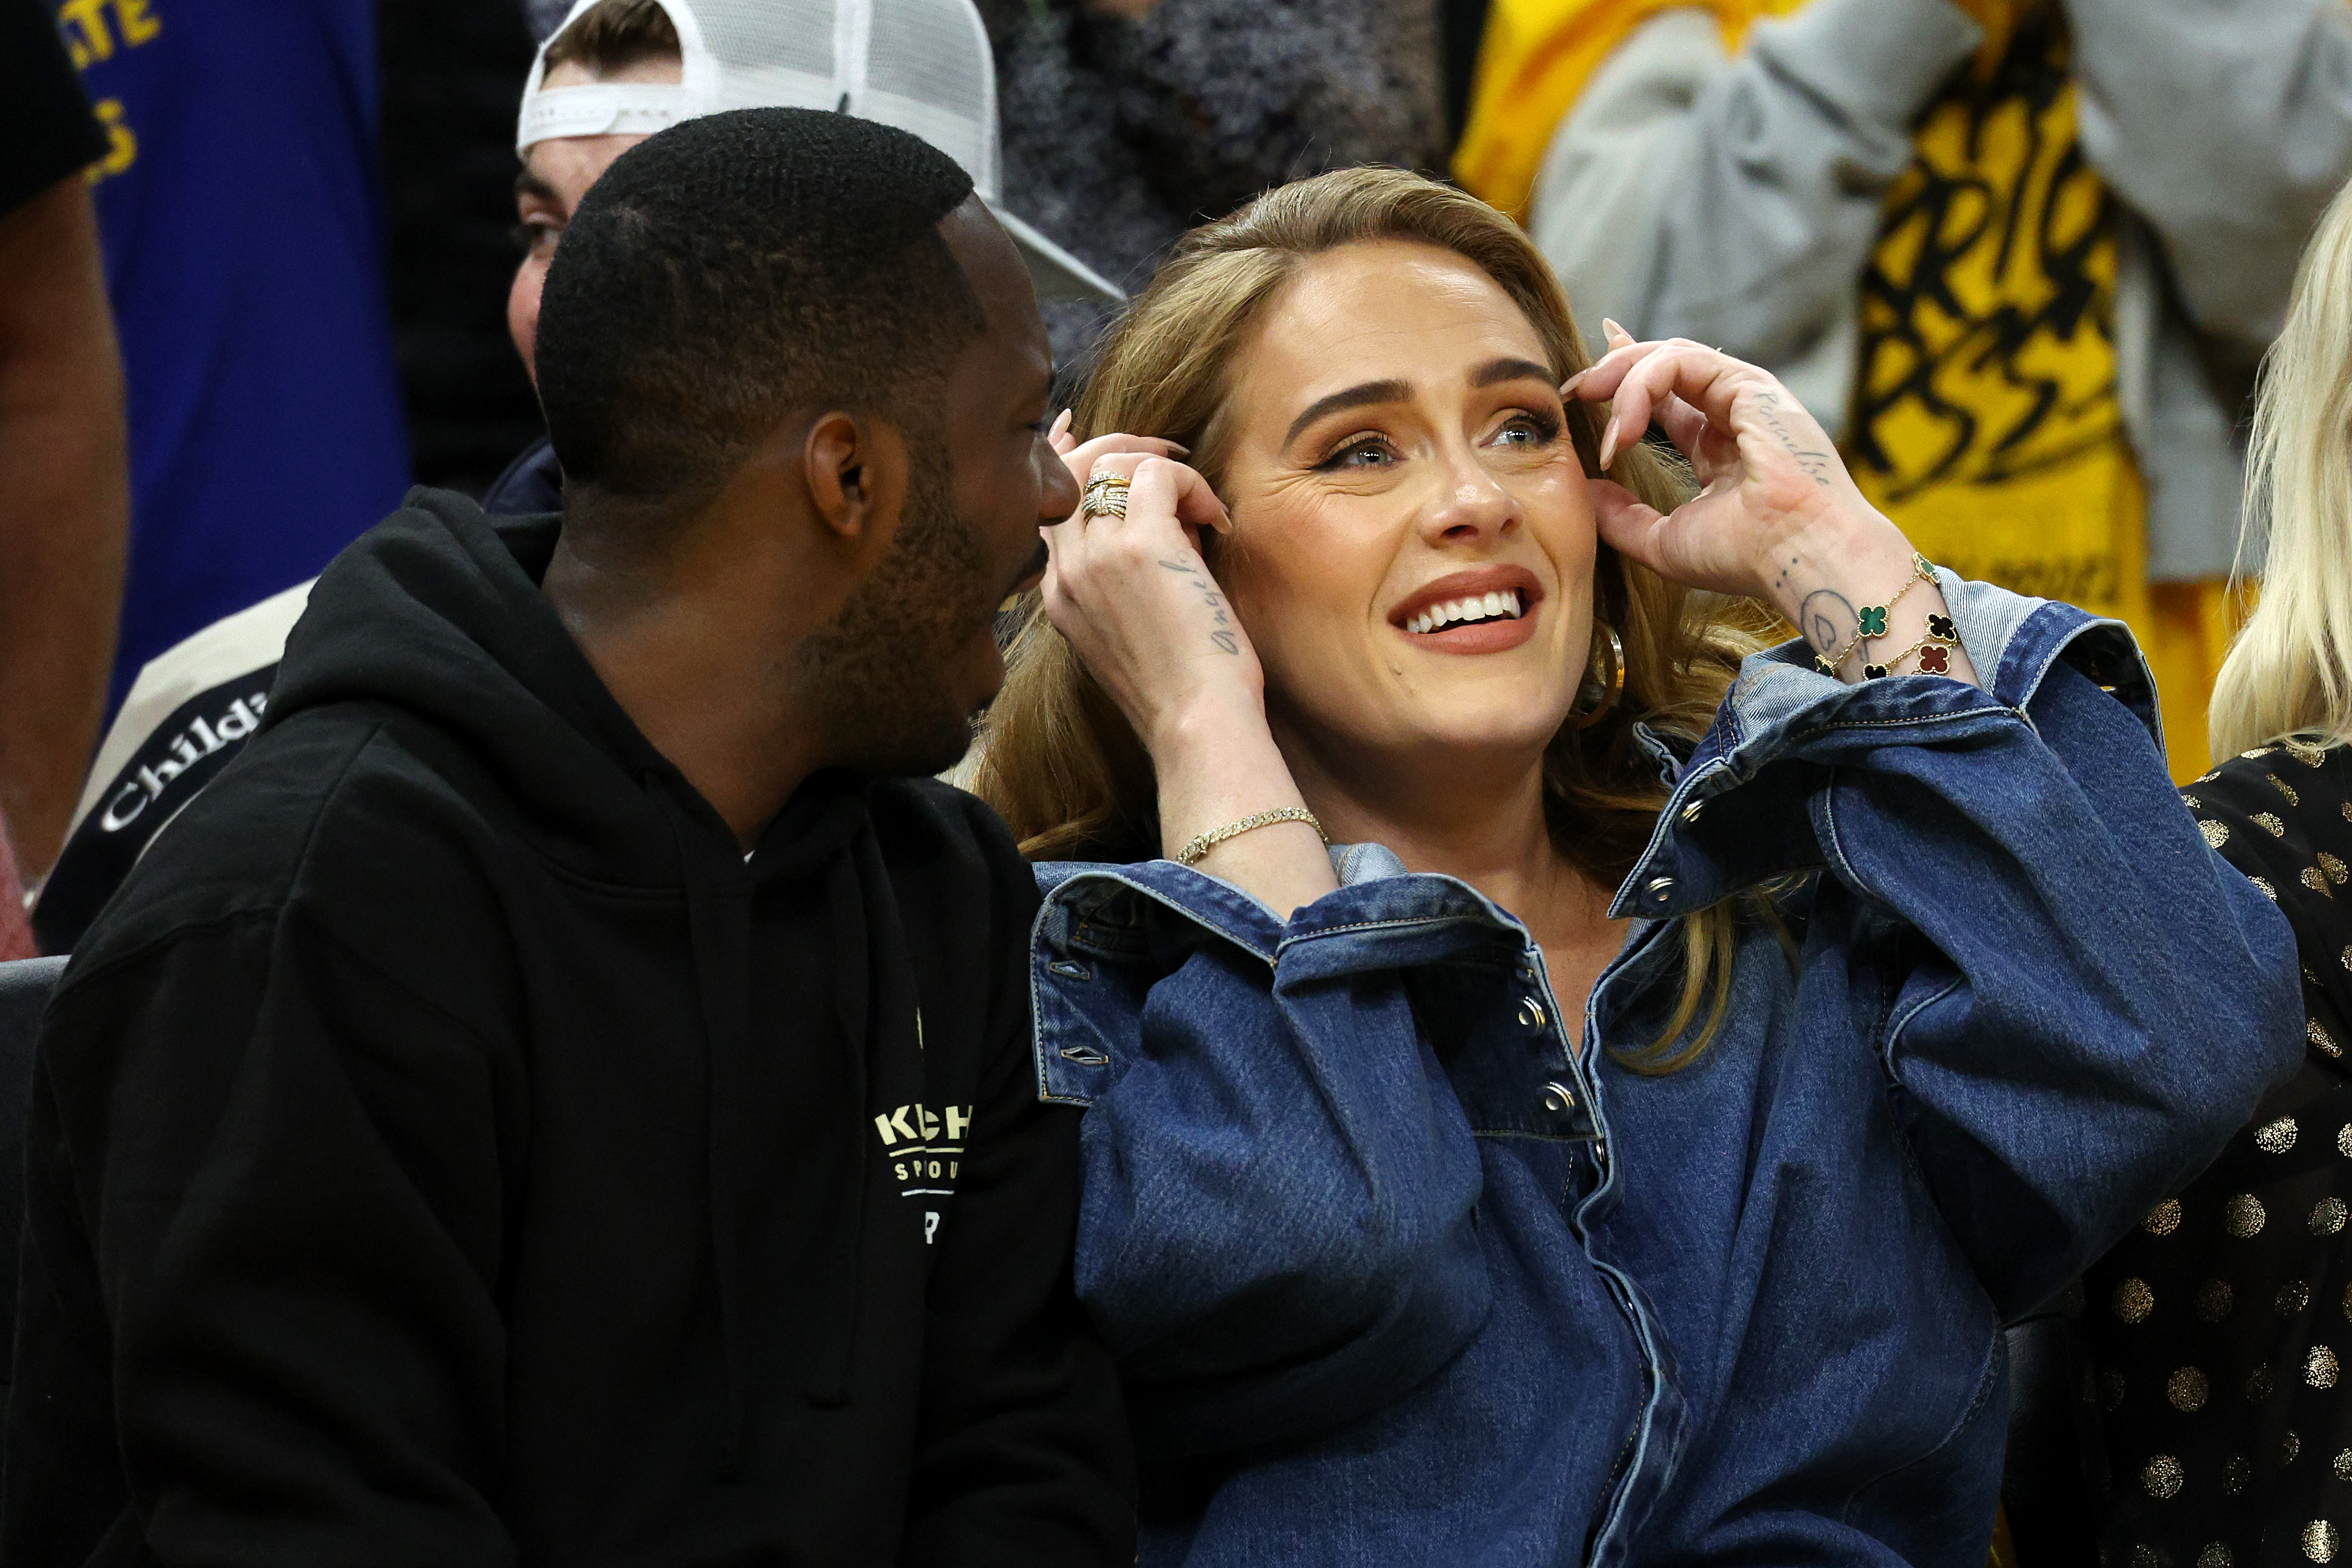 Rich Paul and Adele attend Game Two of the NBA Playoffs Western Conference Finals between the Golden State Warriors and the Dallas Mavericks in San Francisco, California on May 20, 2022 | Source: Getty Images